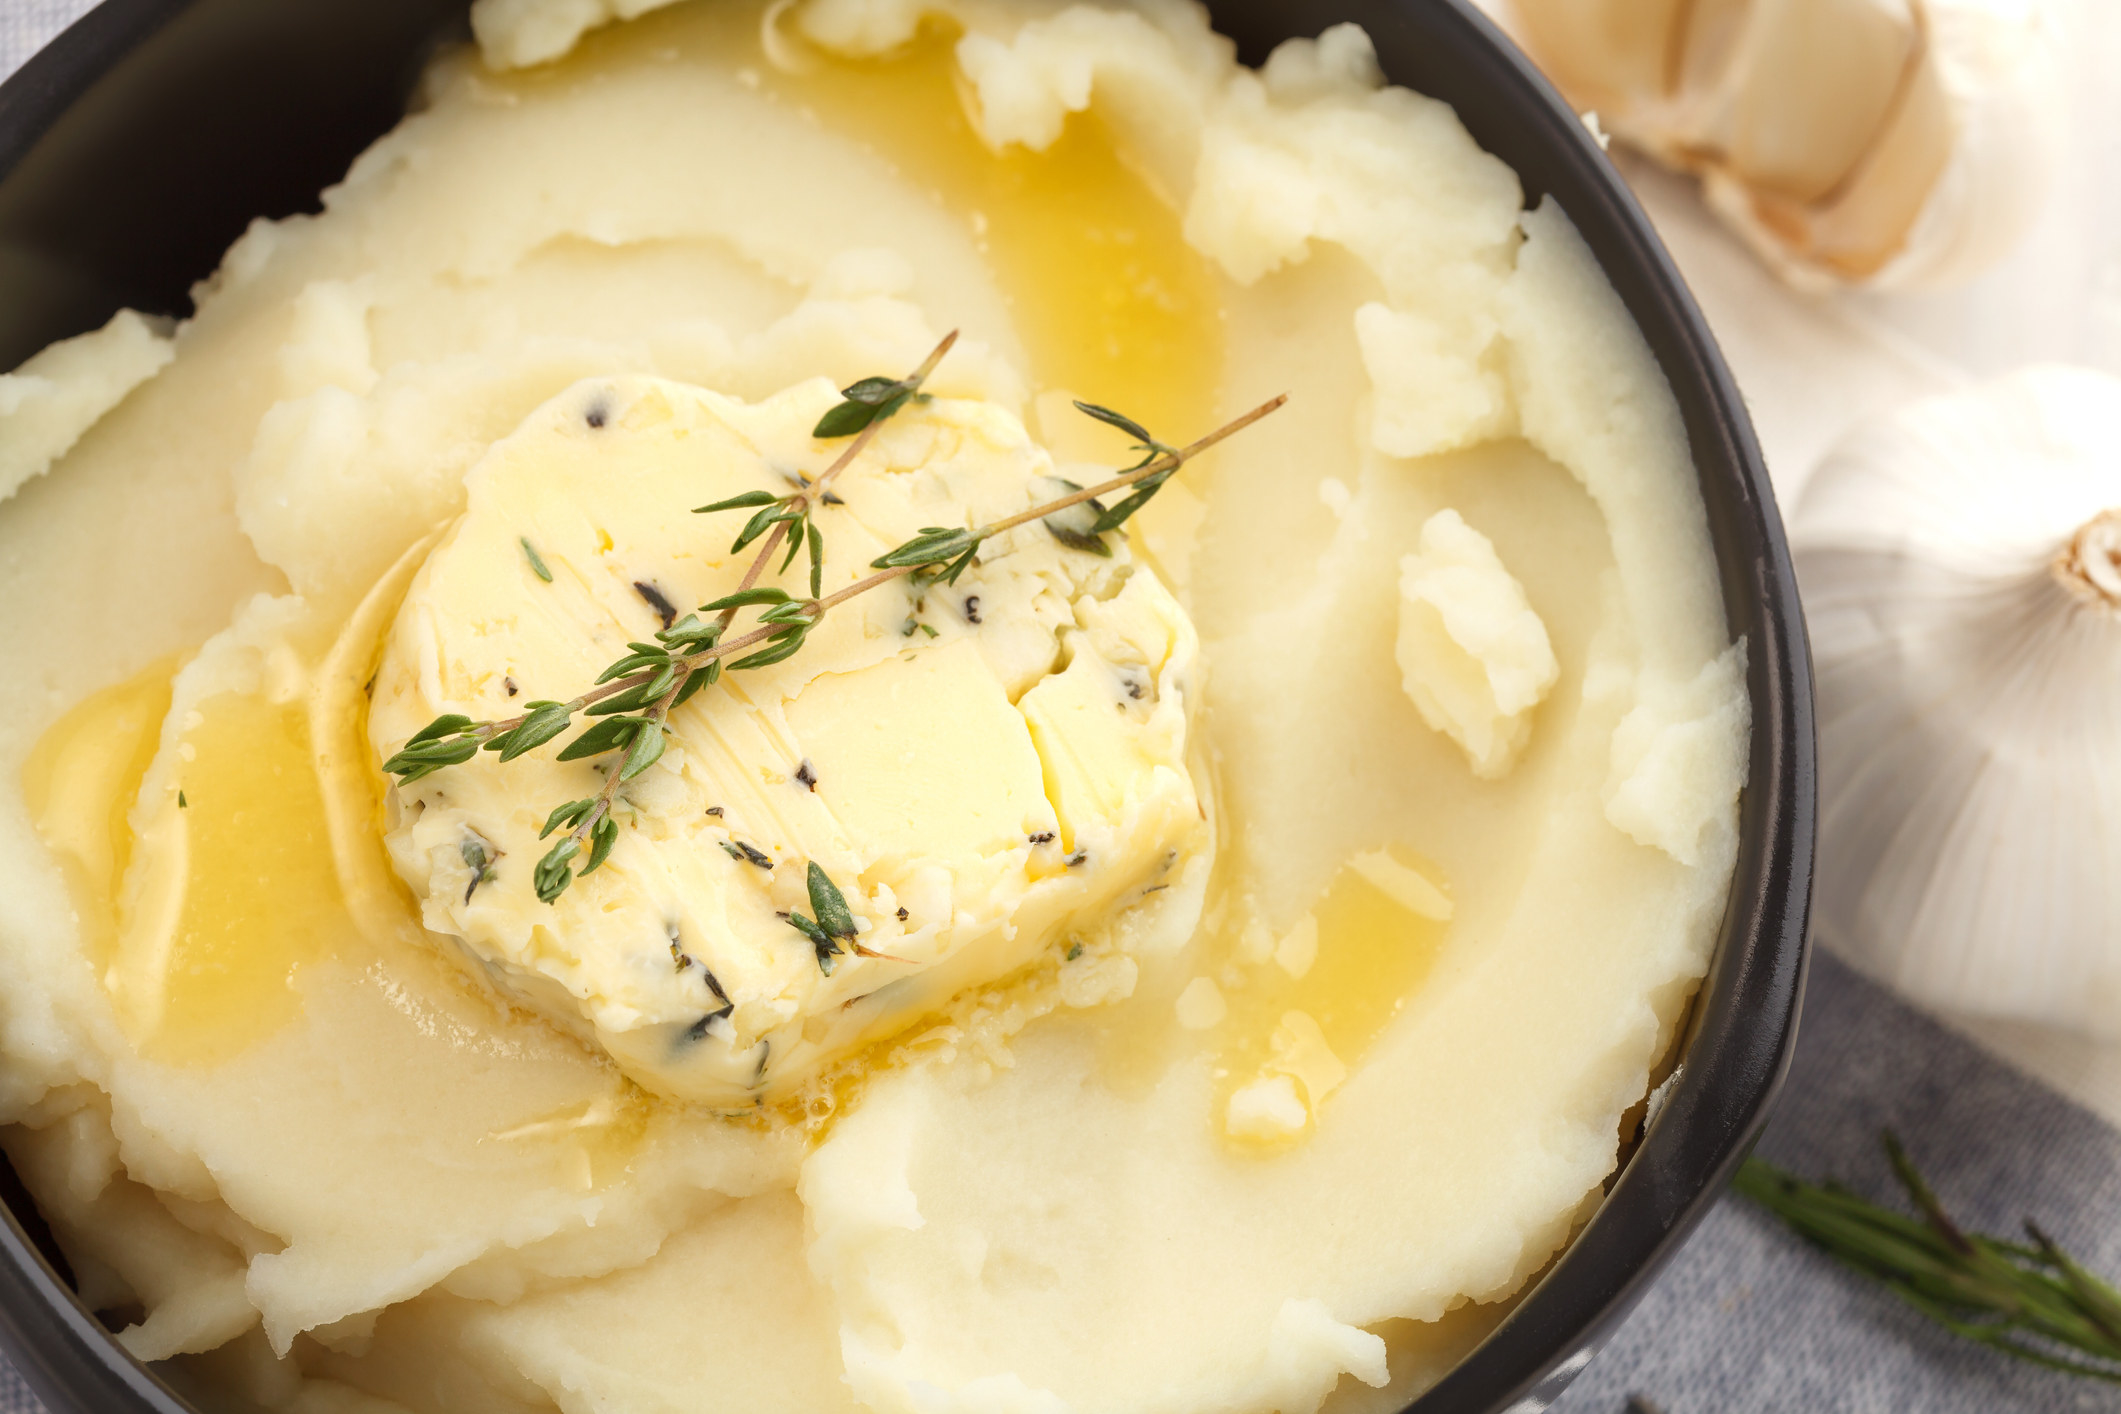 Butter on mashed potatoes